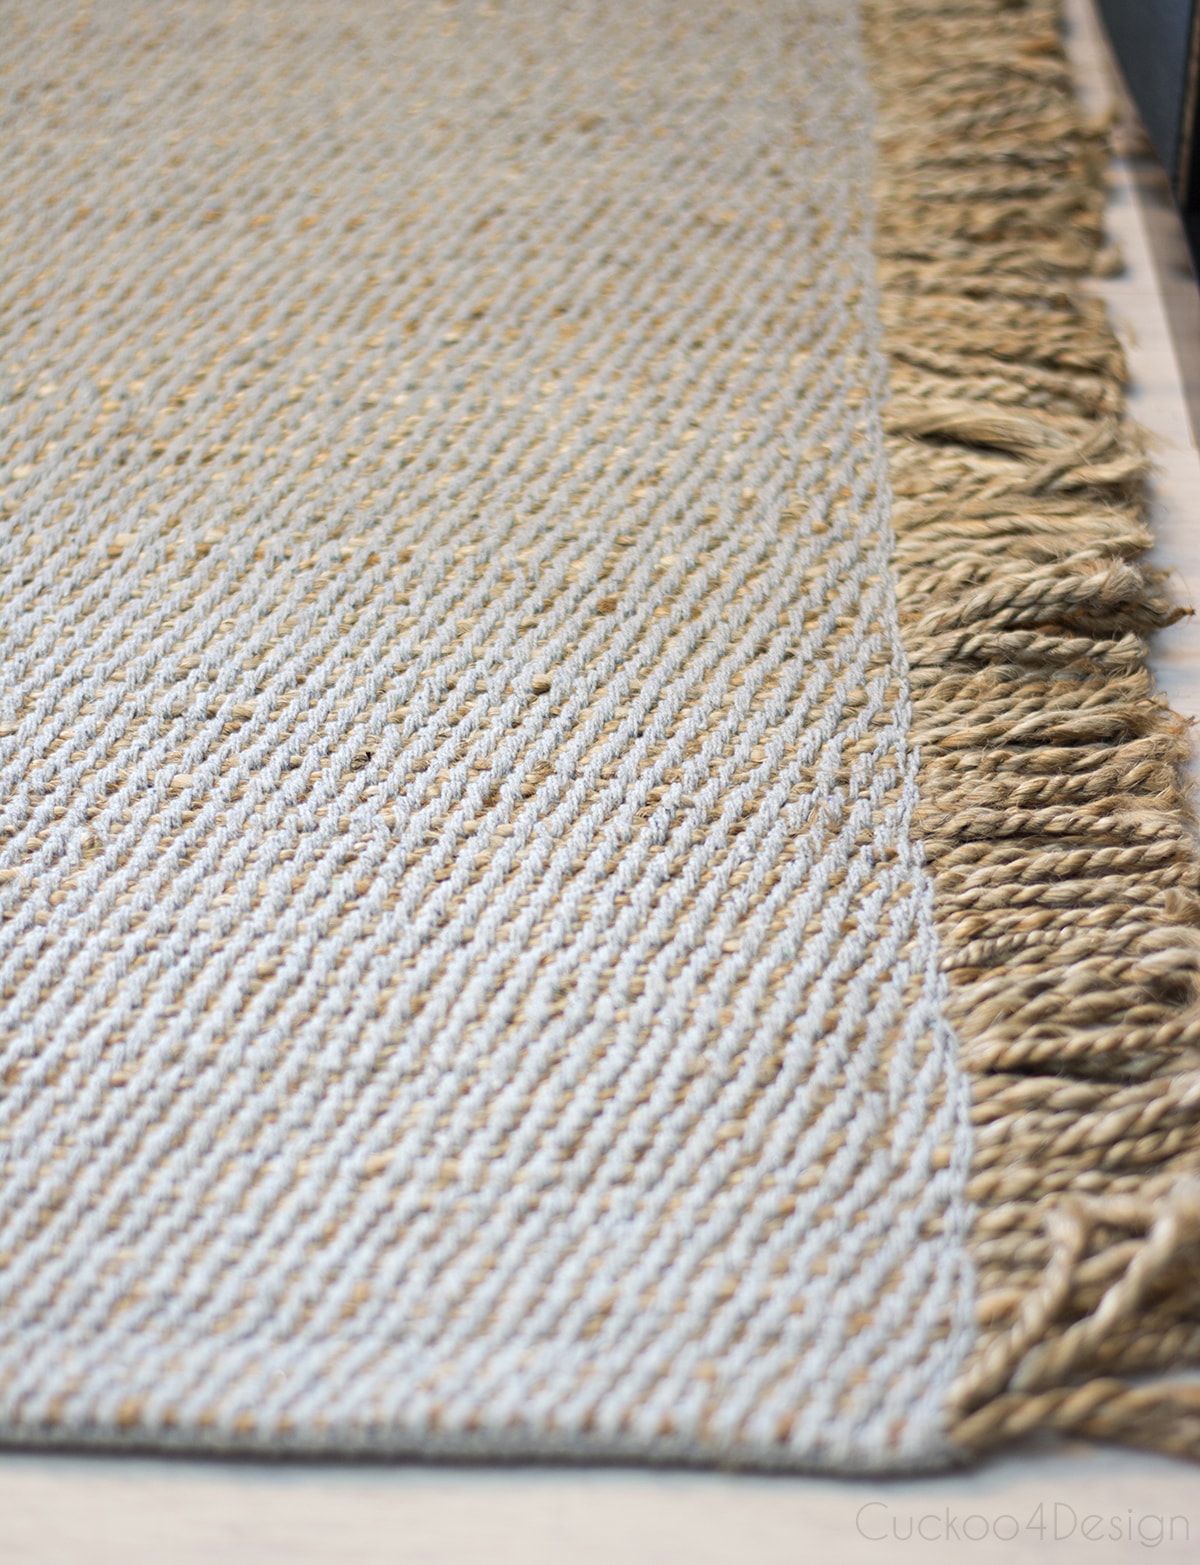 close up view of rug texture